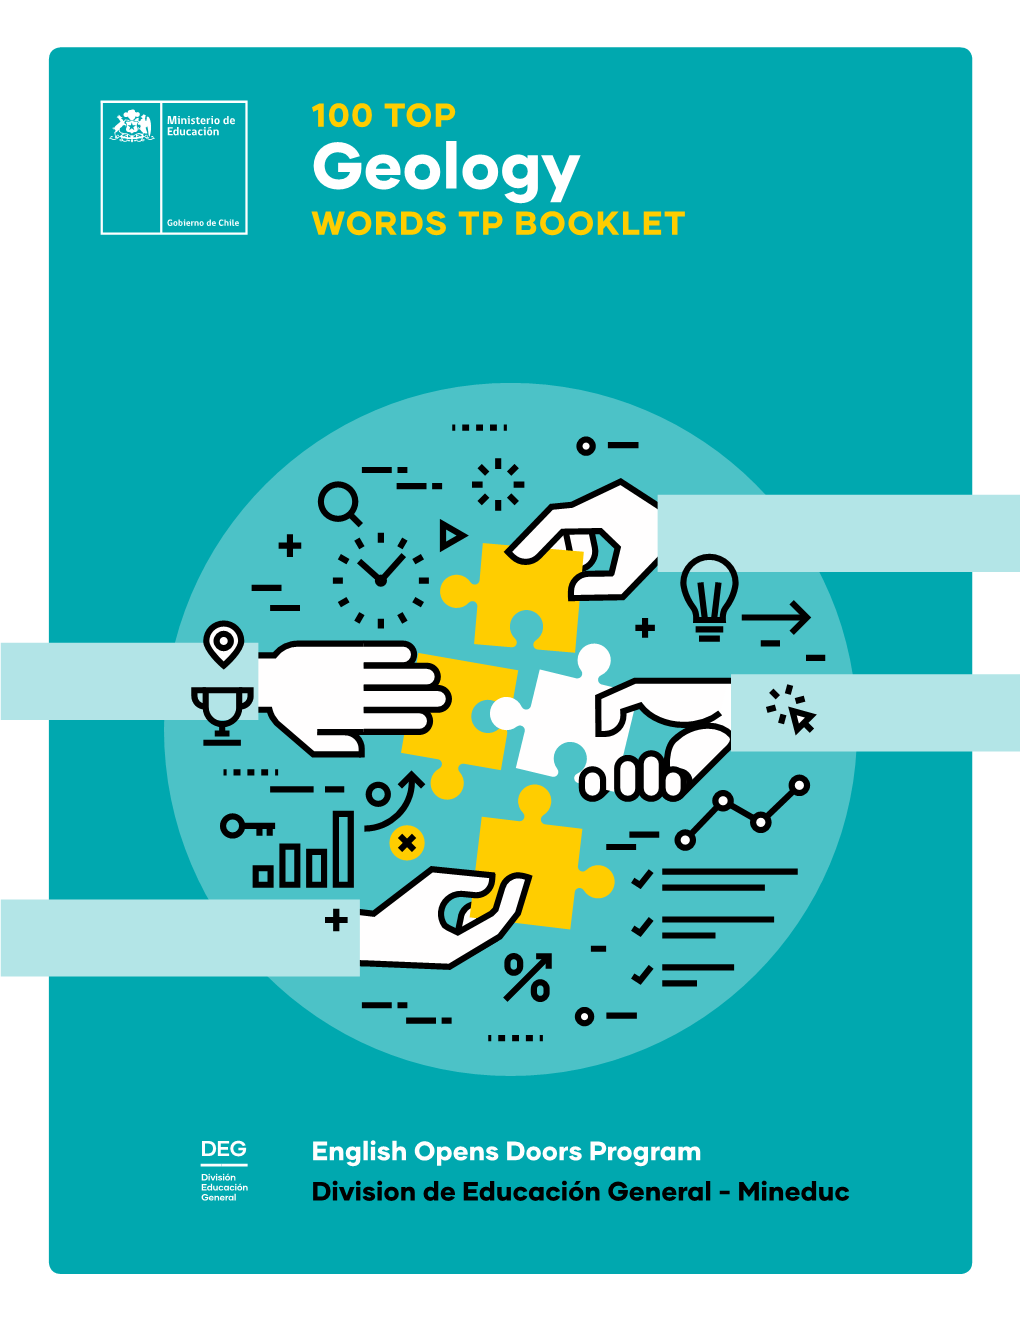 Geology WORDS TP BOOKLET